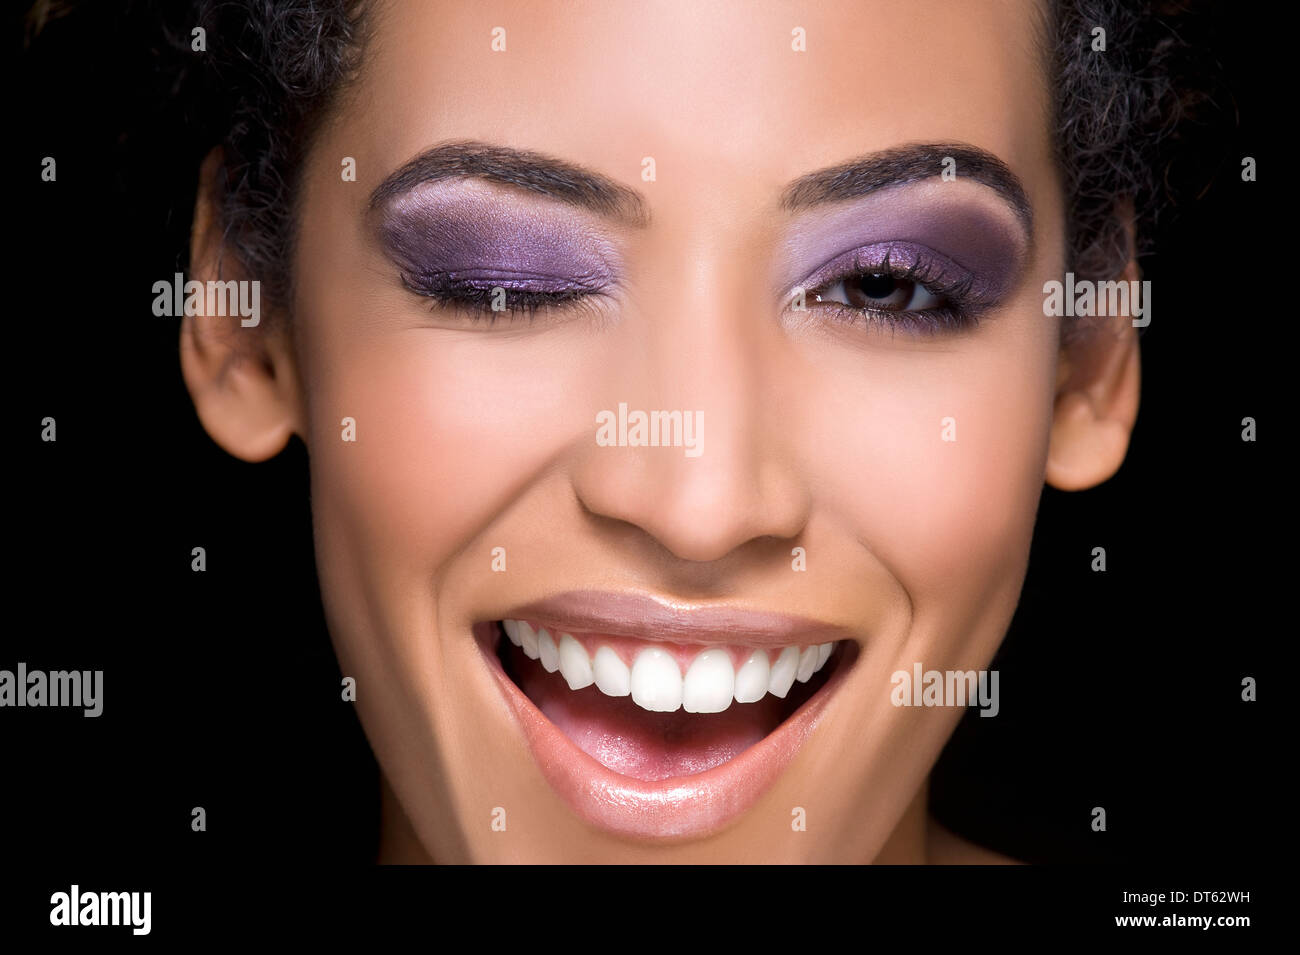 Close up studio portrait of young woman winking Stock Photo